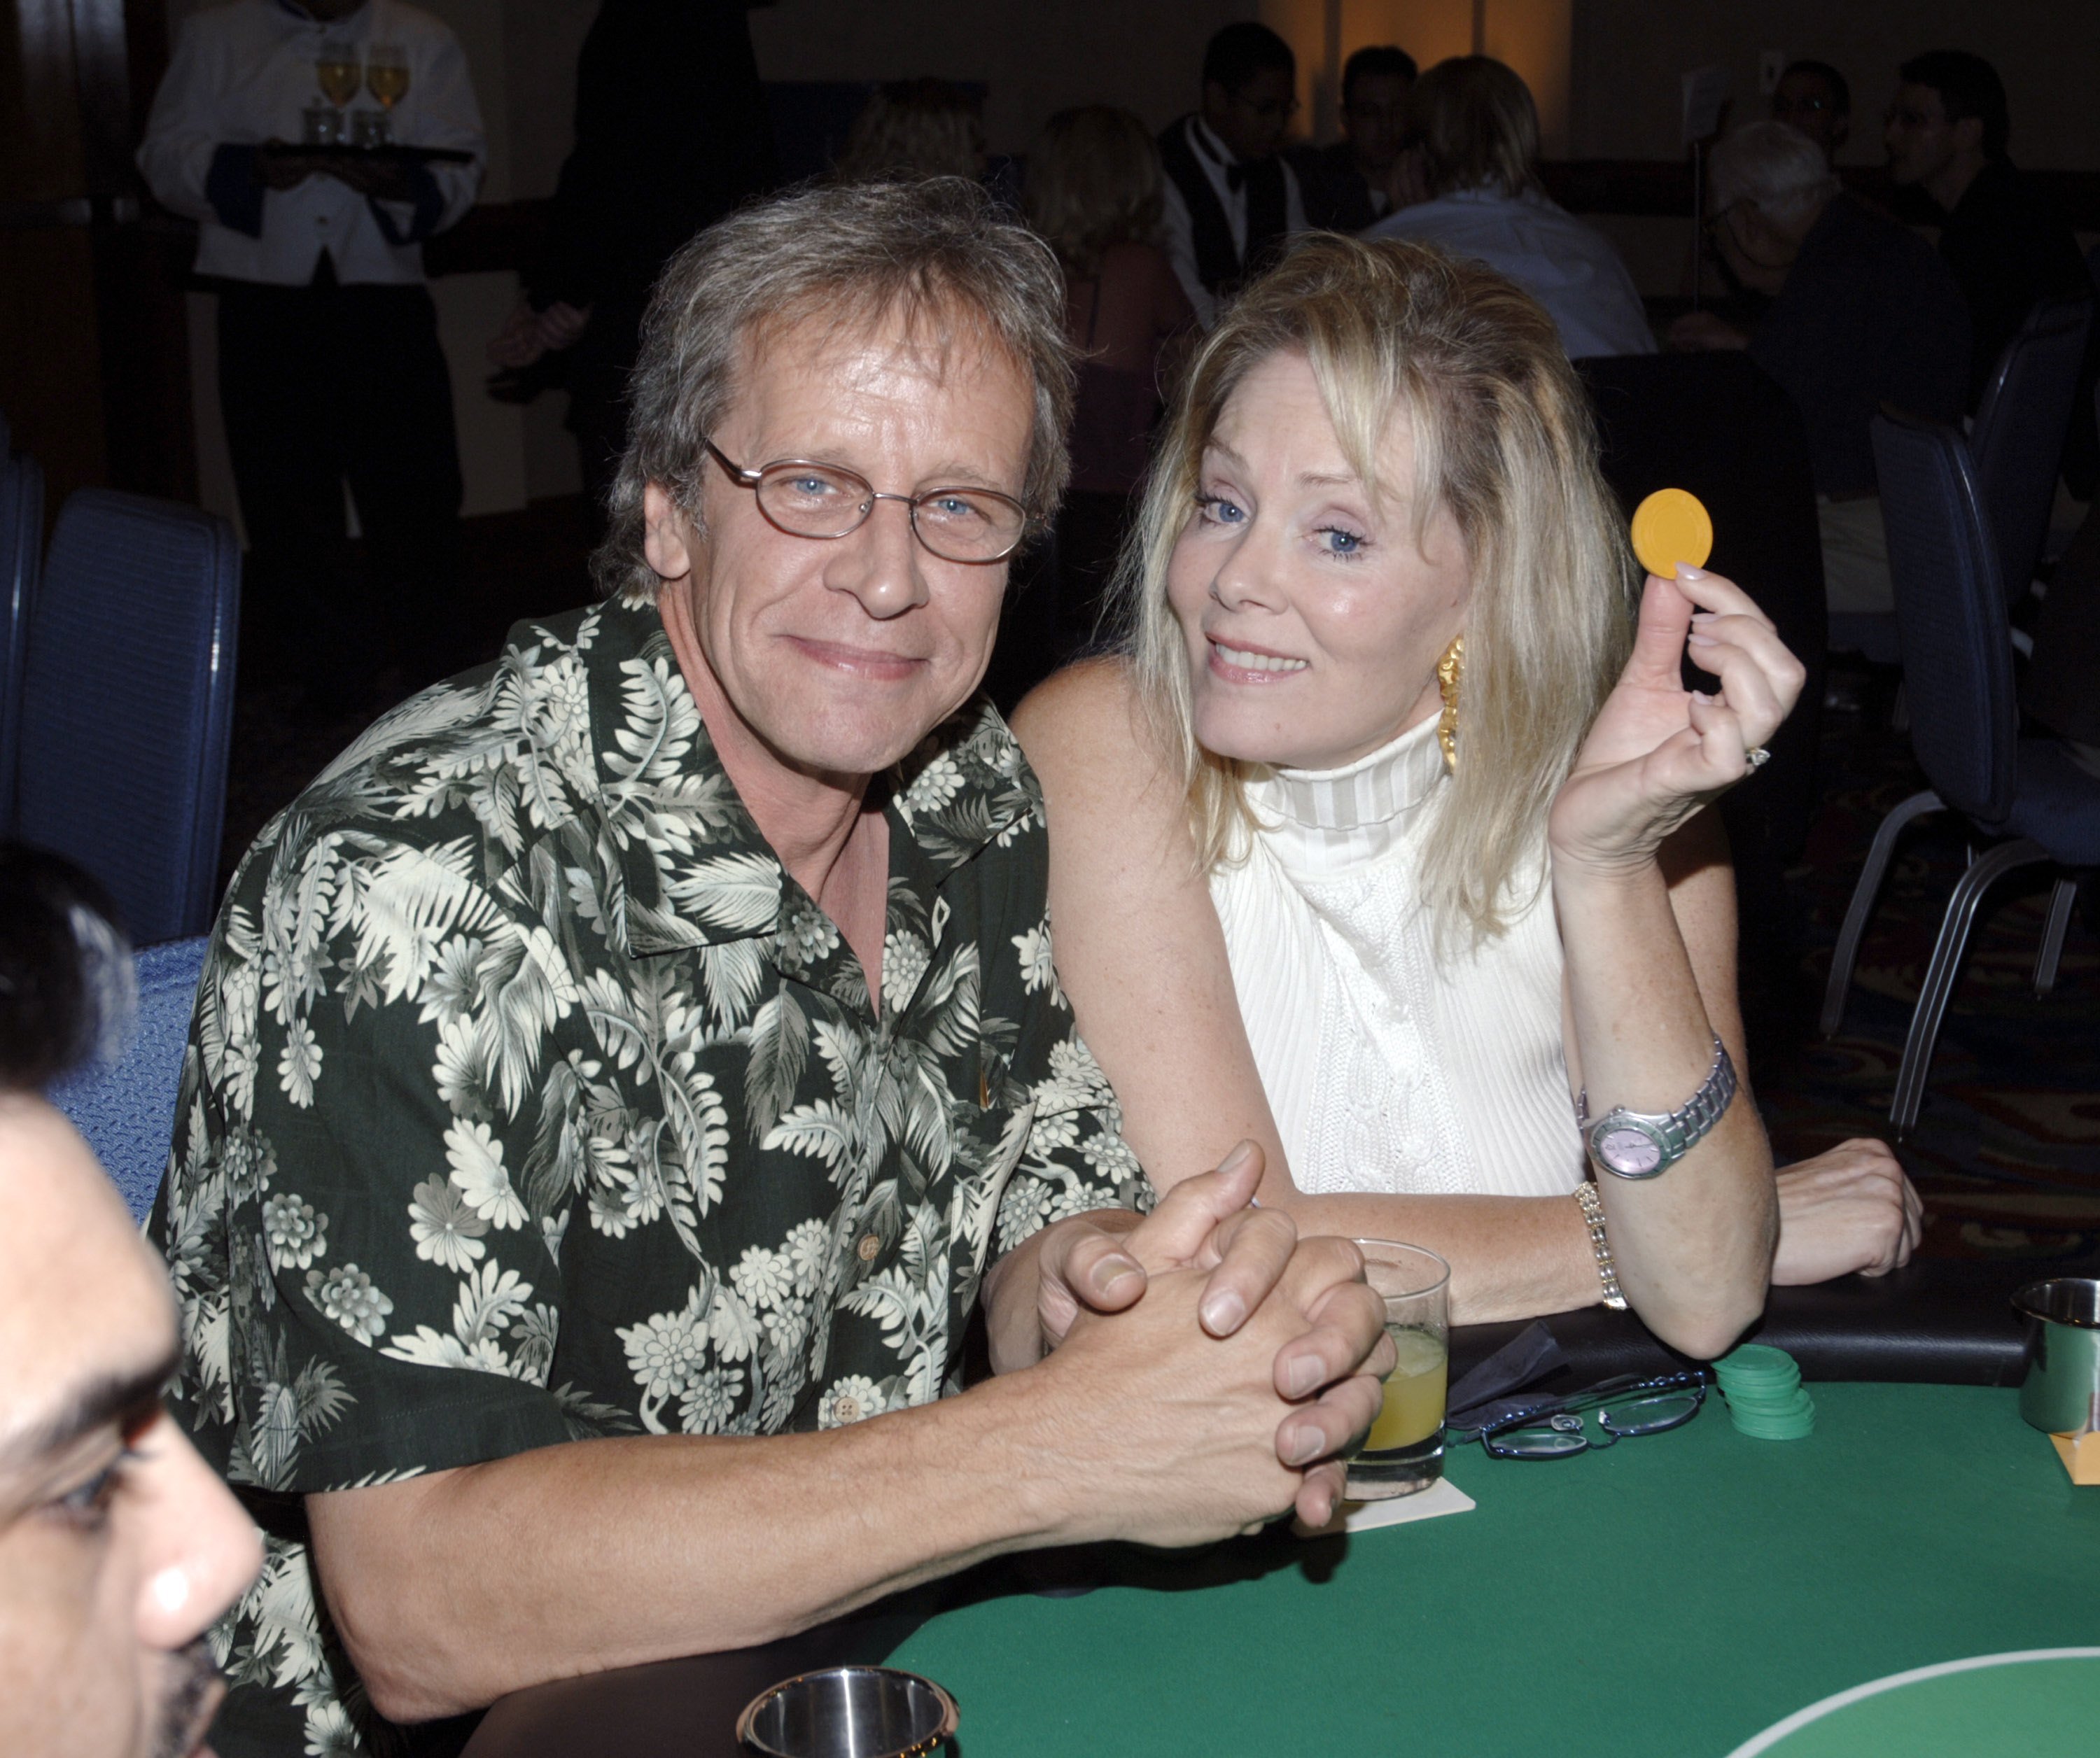  Richard Gilliland and Jean Smart attend the Texas Hold'Em Casino Night Fundraiser for the Caucus Foundation on August 19, 2006 | Source: Getty Images